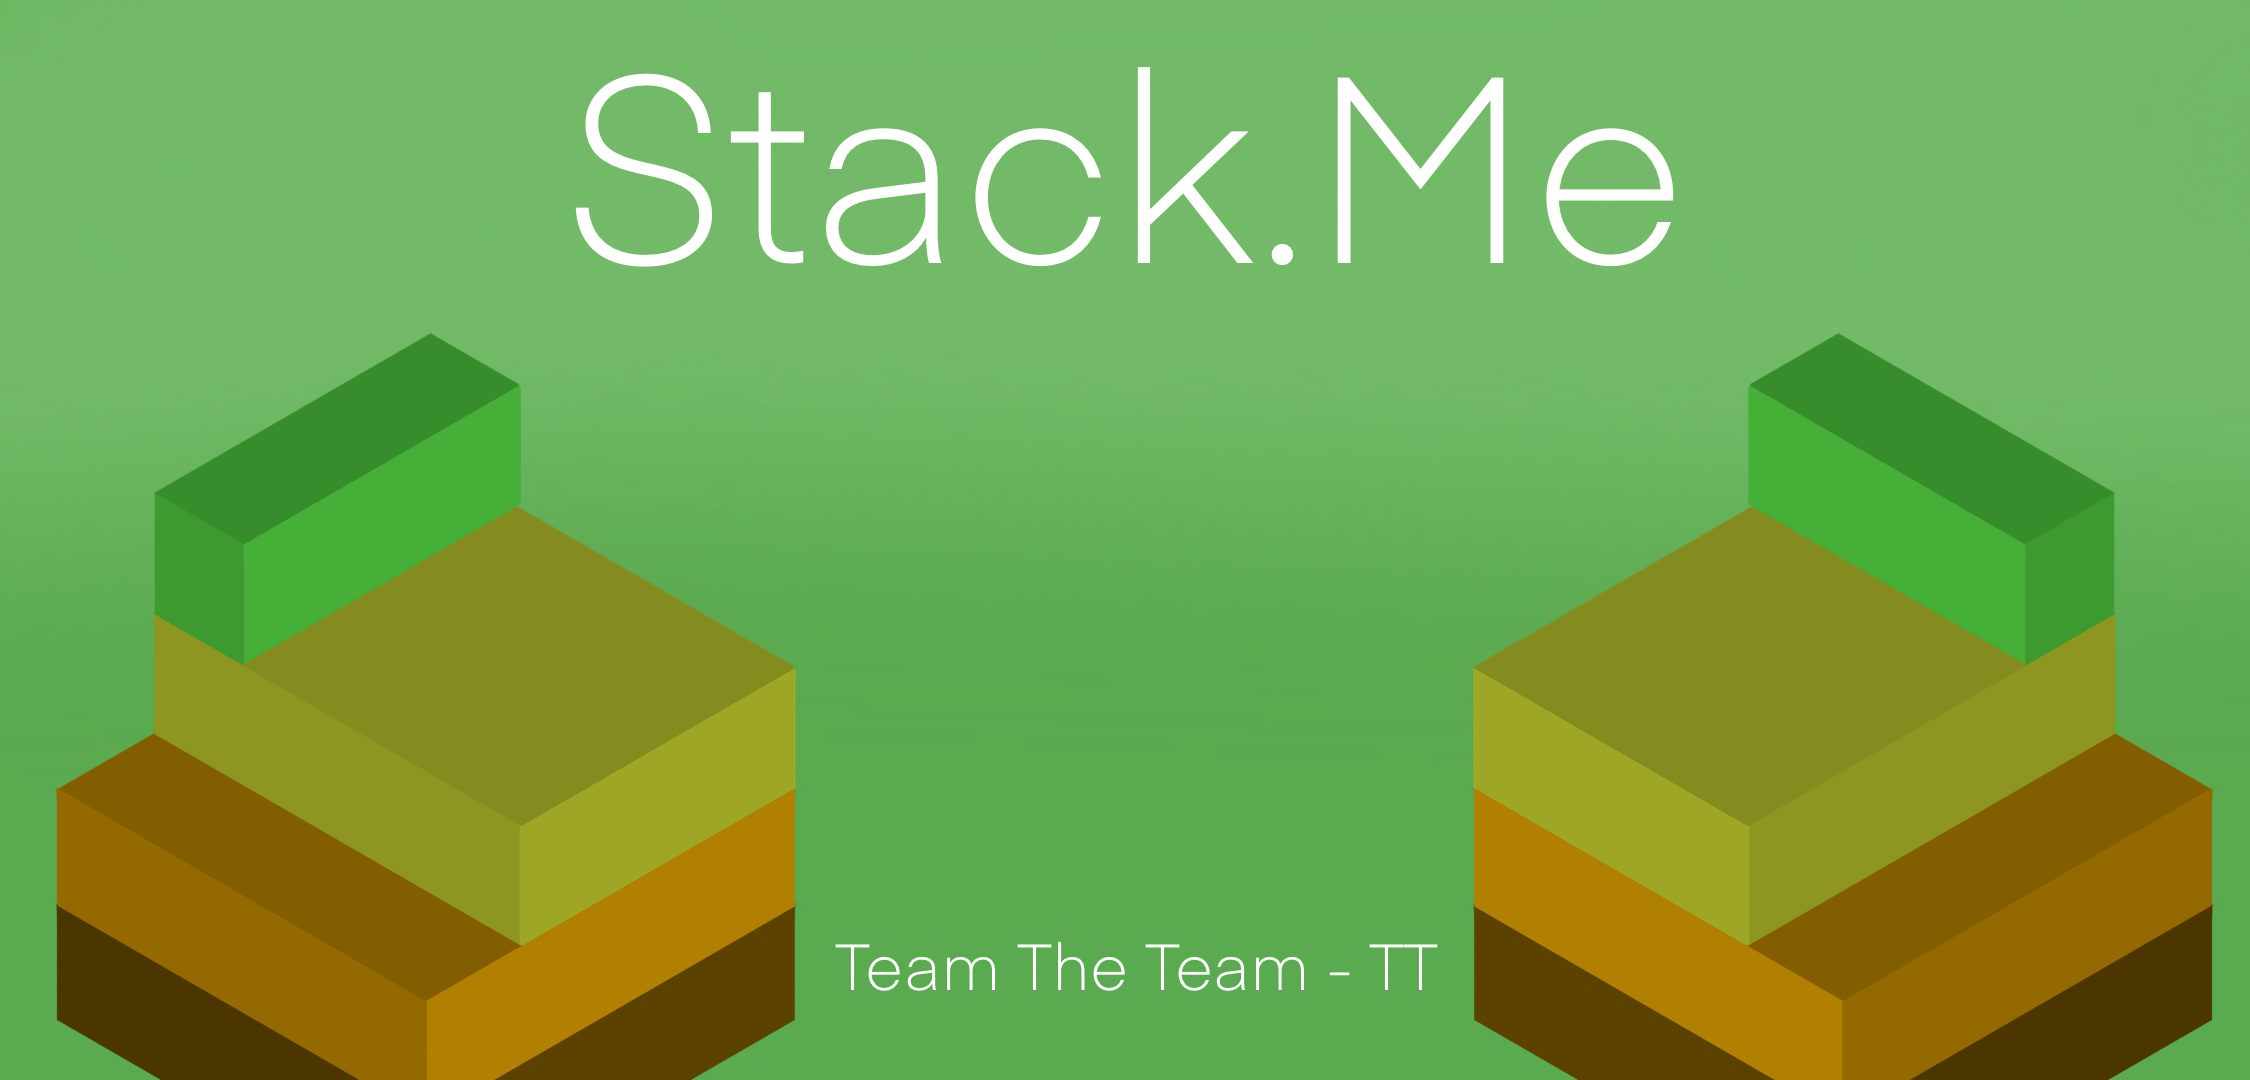 Stack.Me